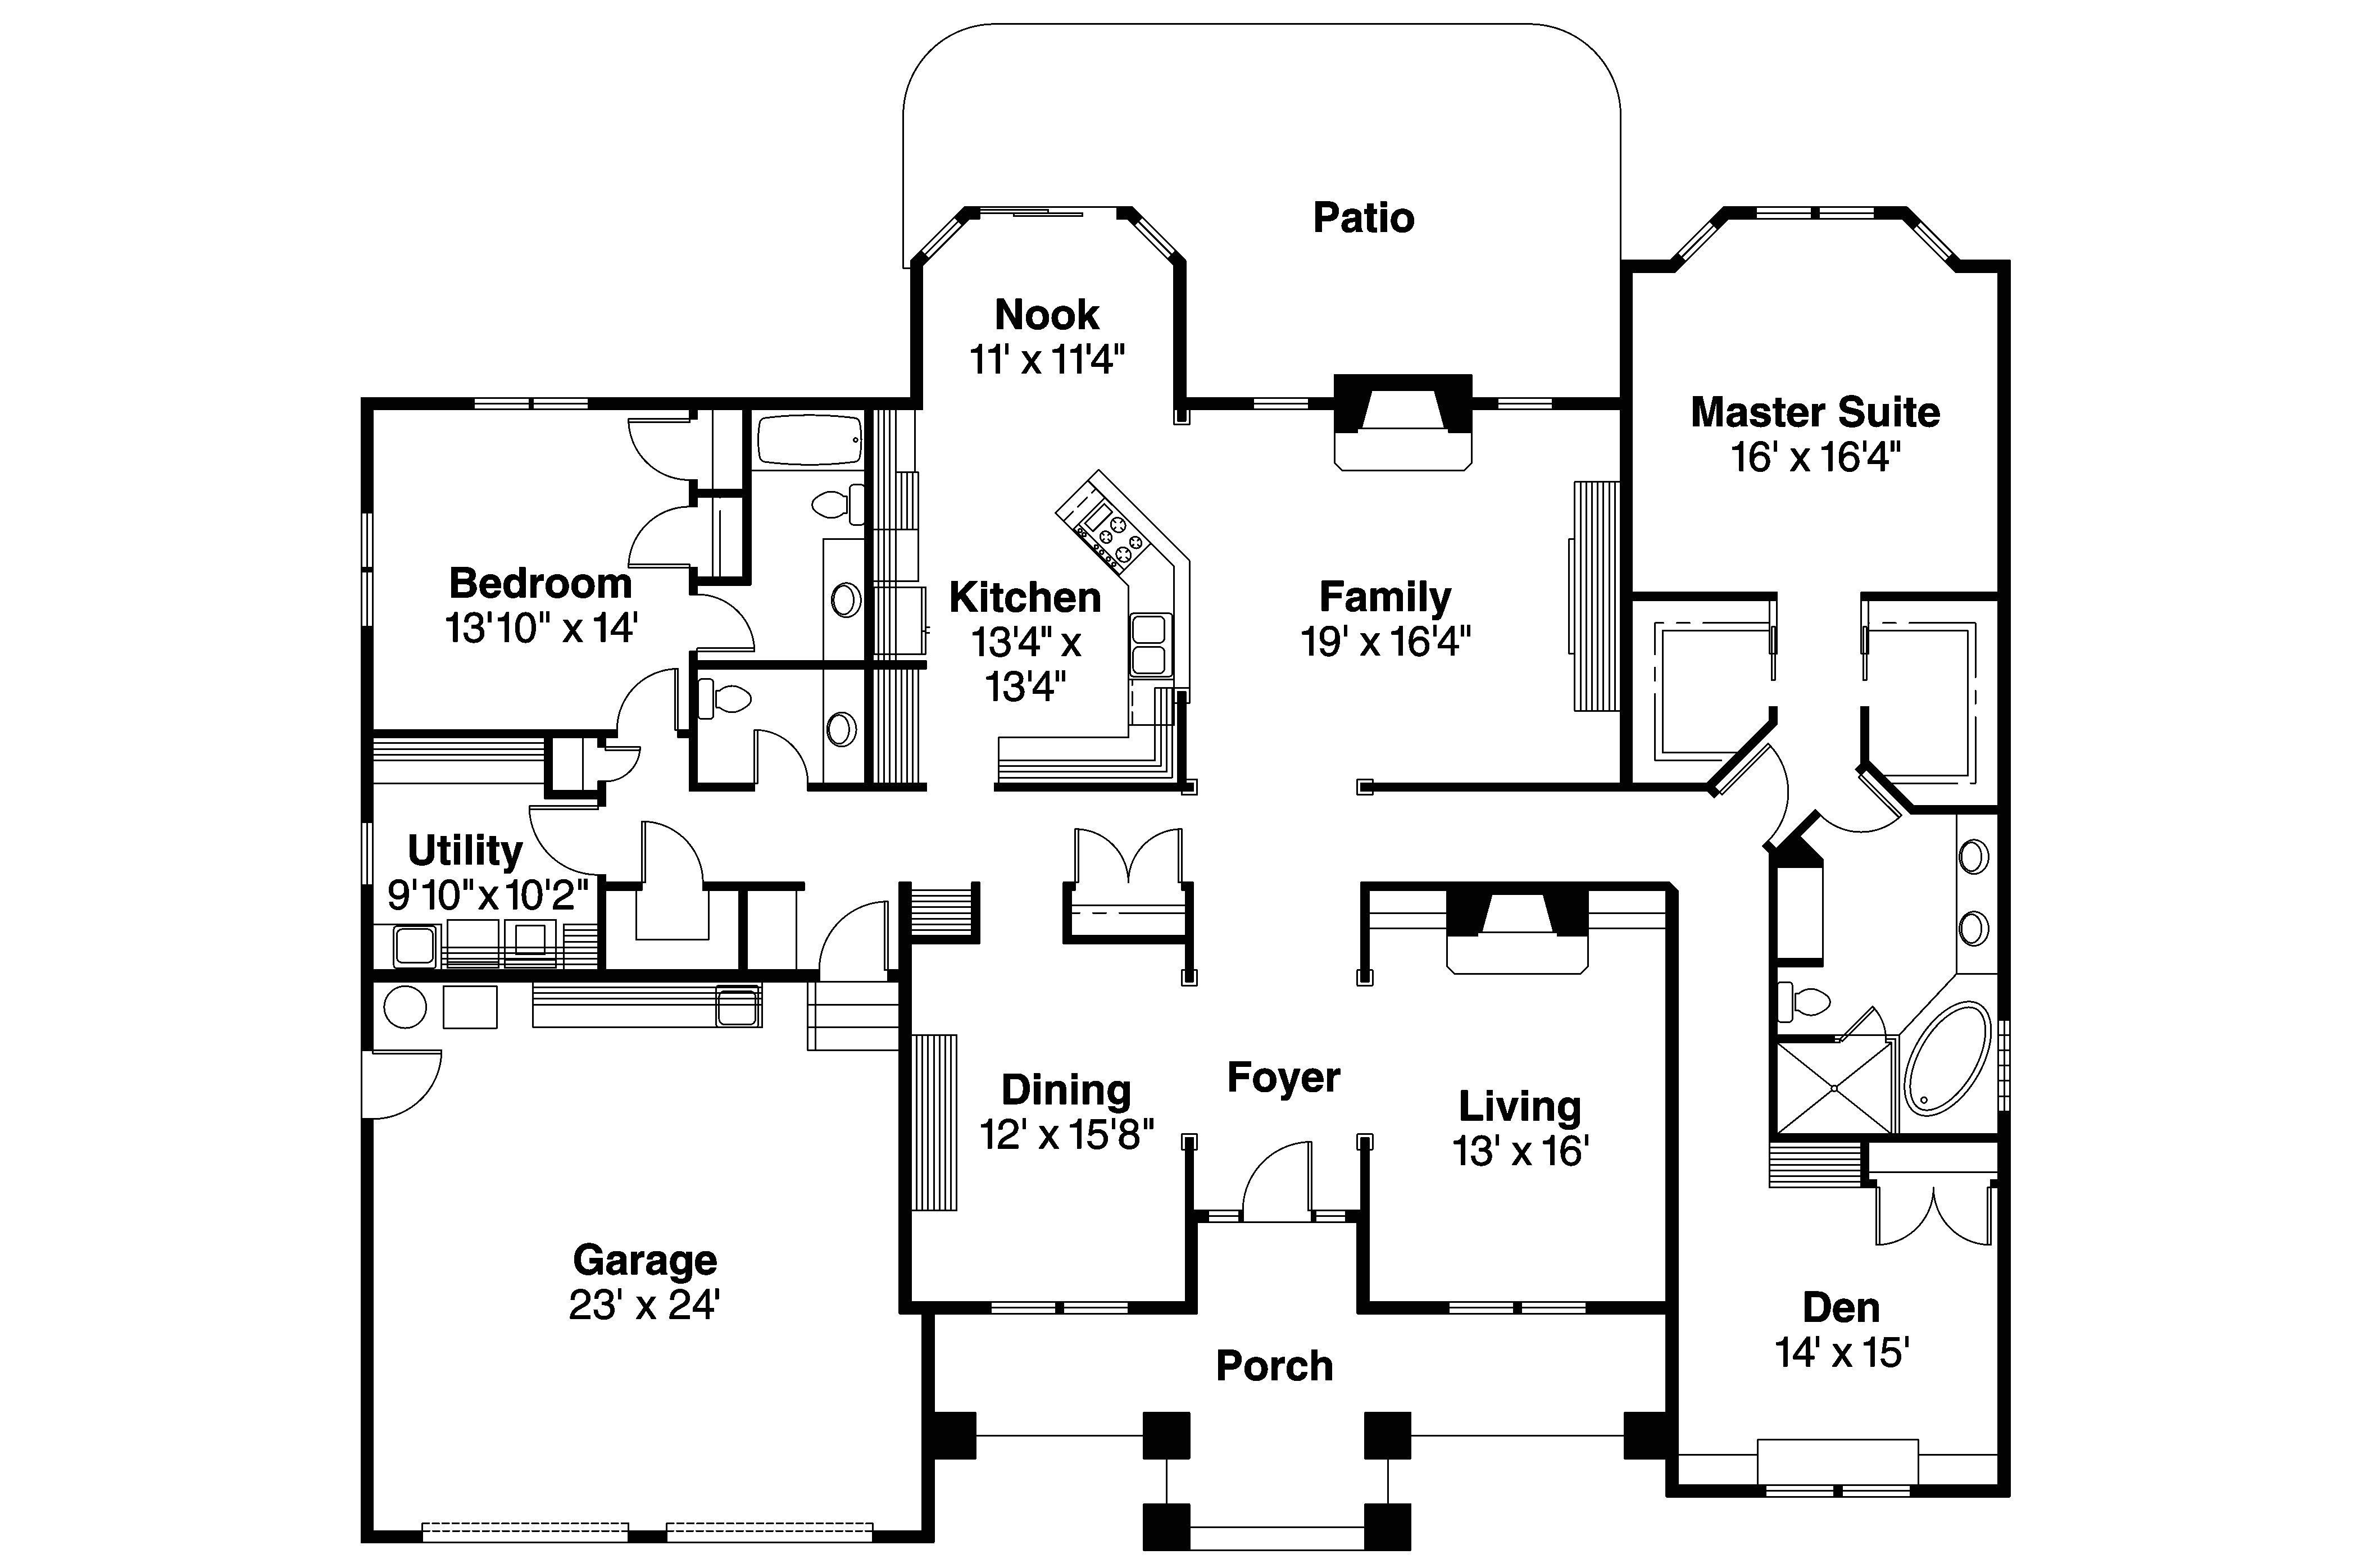 Contemporary Floor Plans Homes Contemporary House Plans Stansbury 30 500 associated